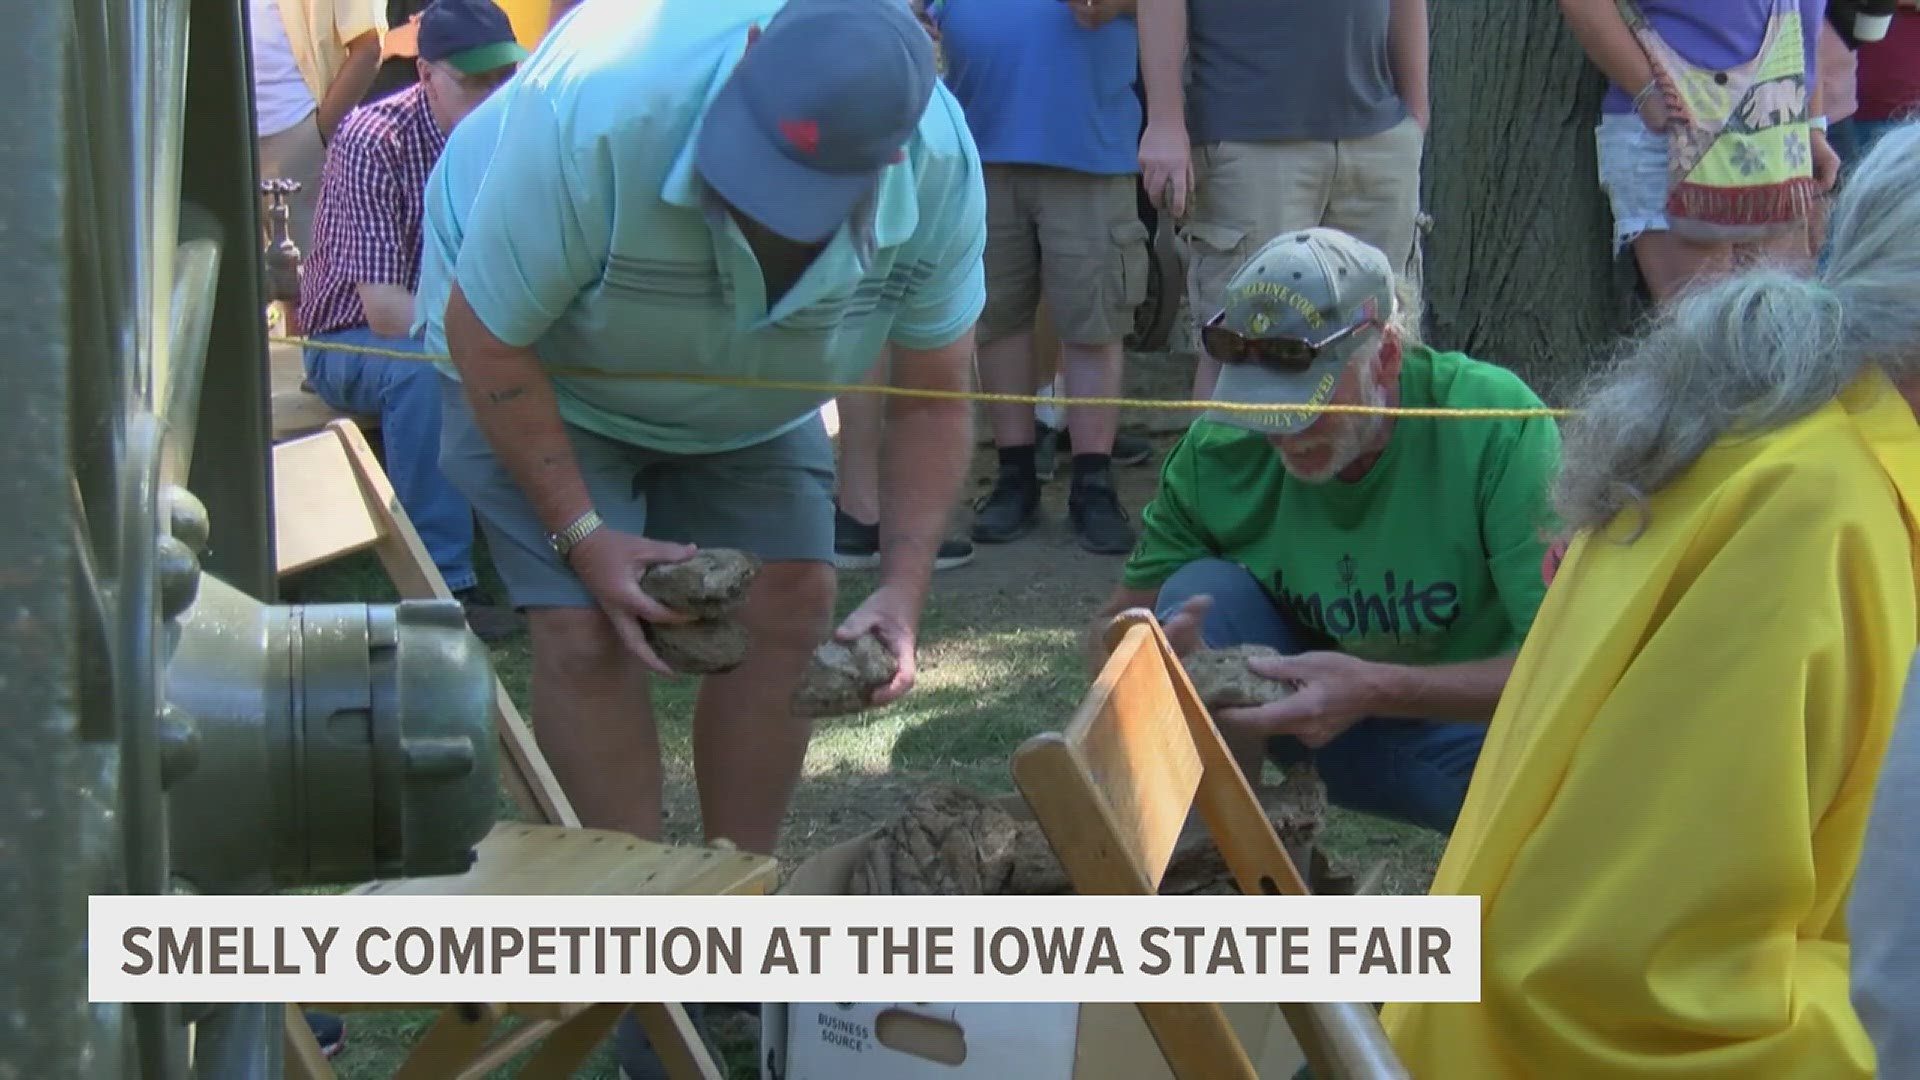 Contestants took turns finding a chuck-able cow chip and throwing it as far as they could.